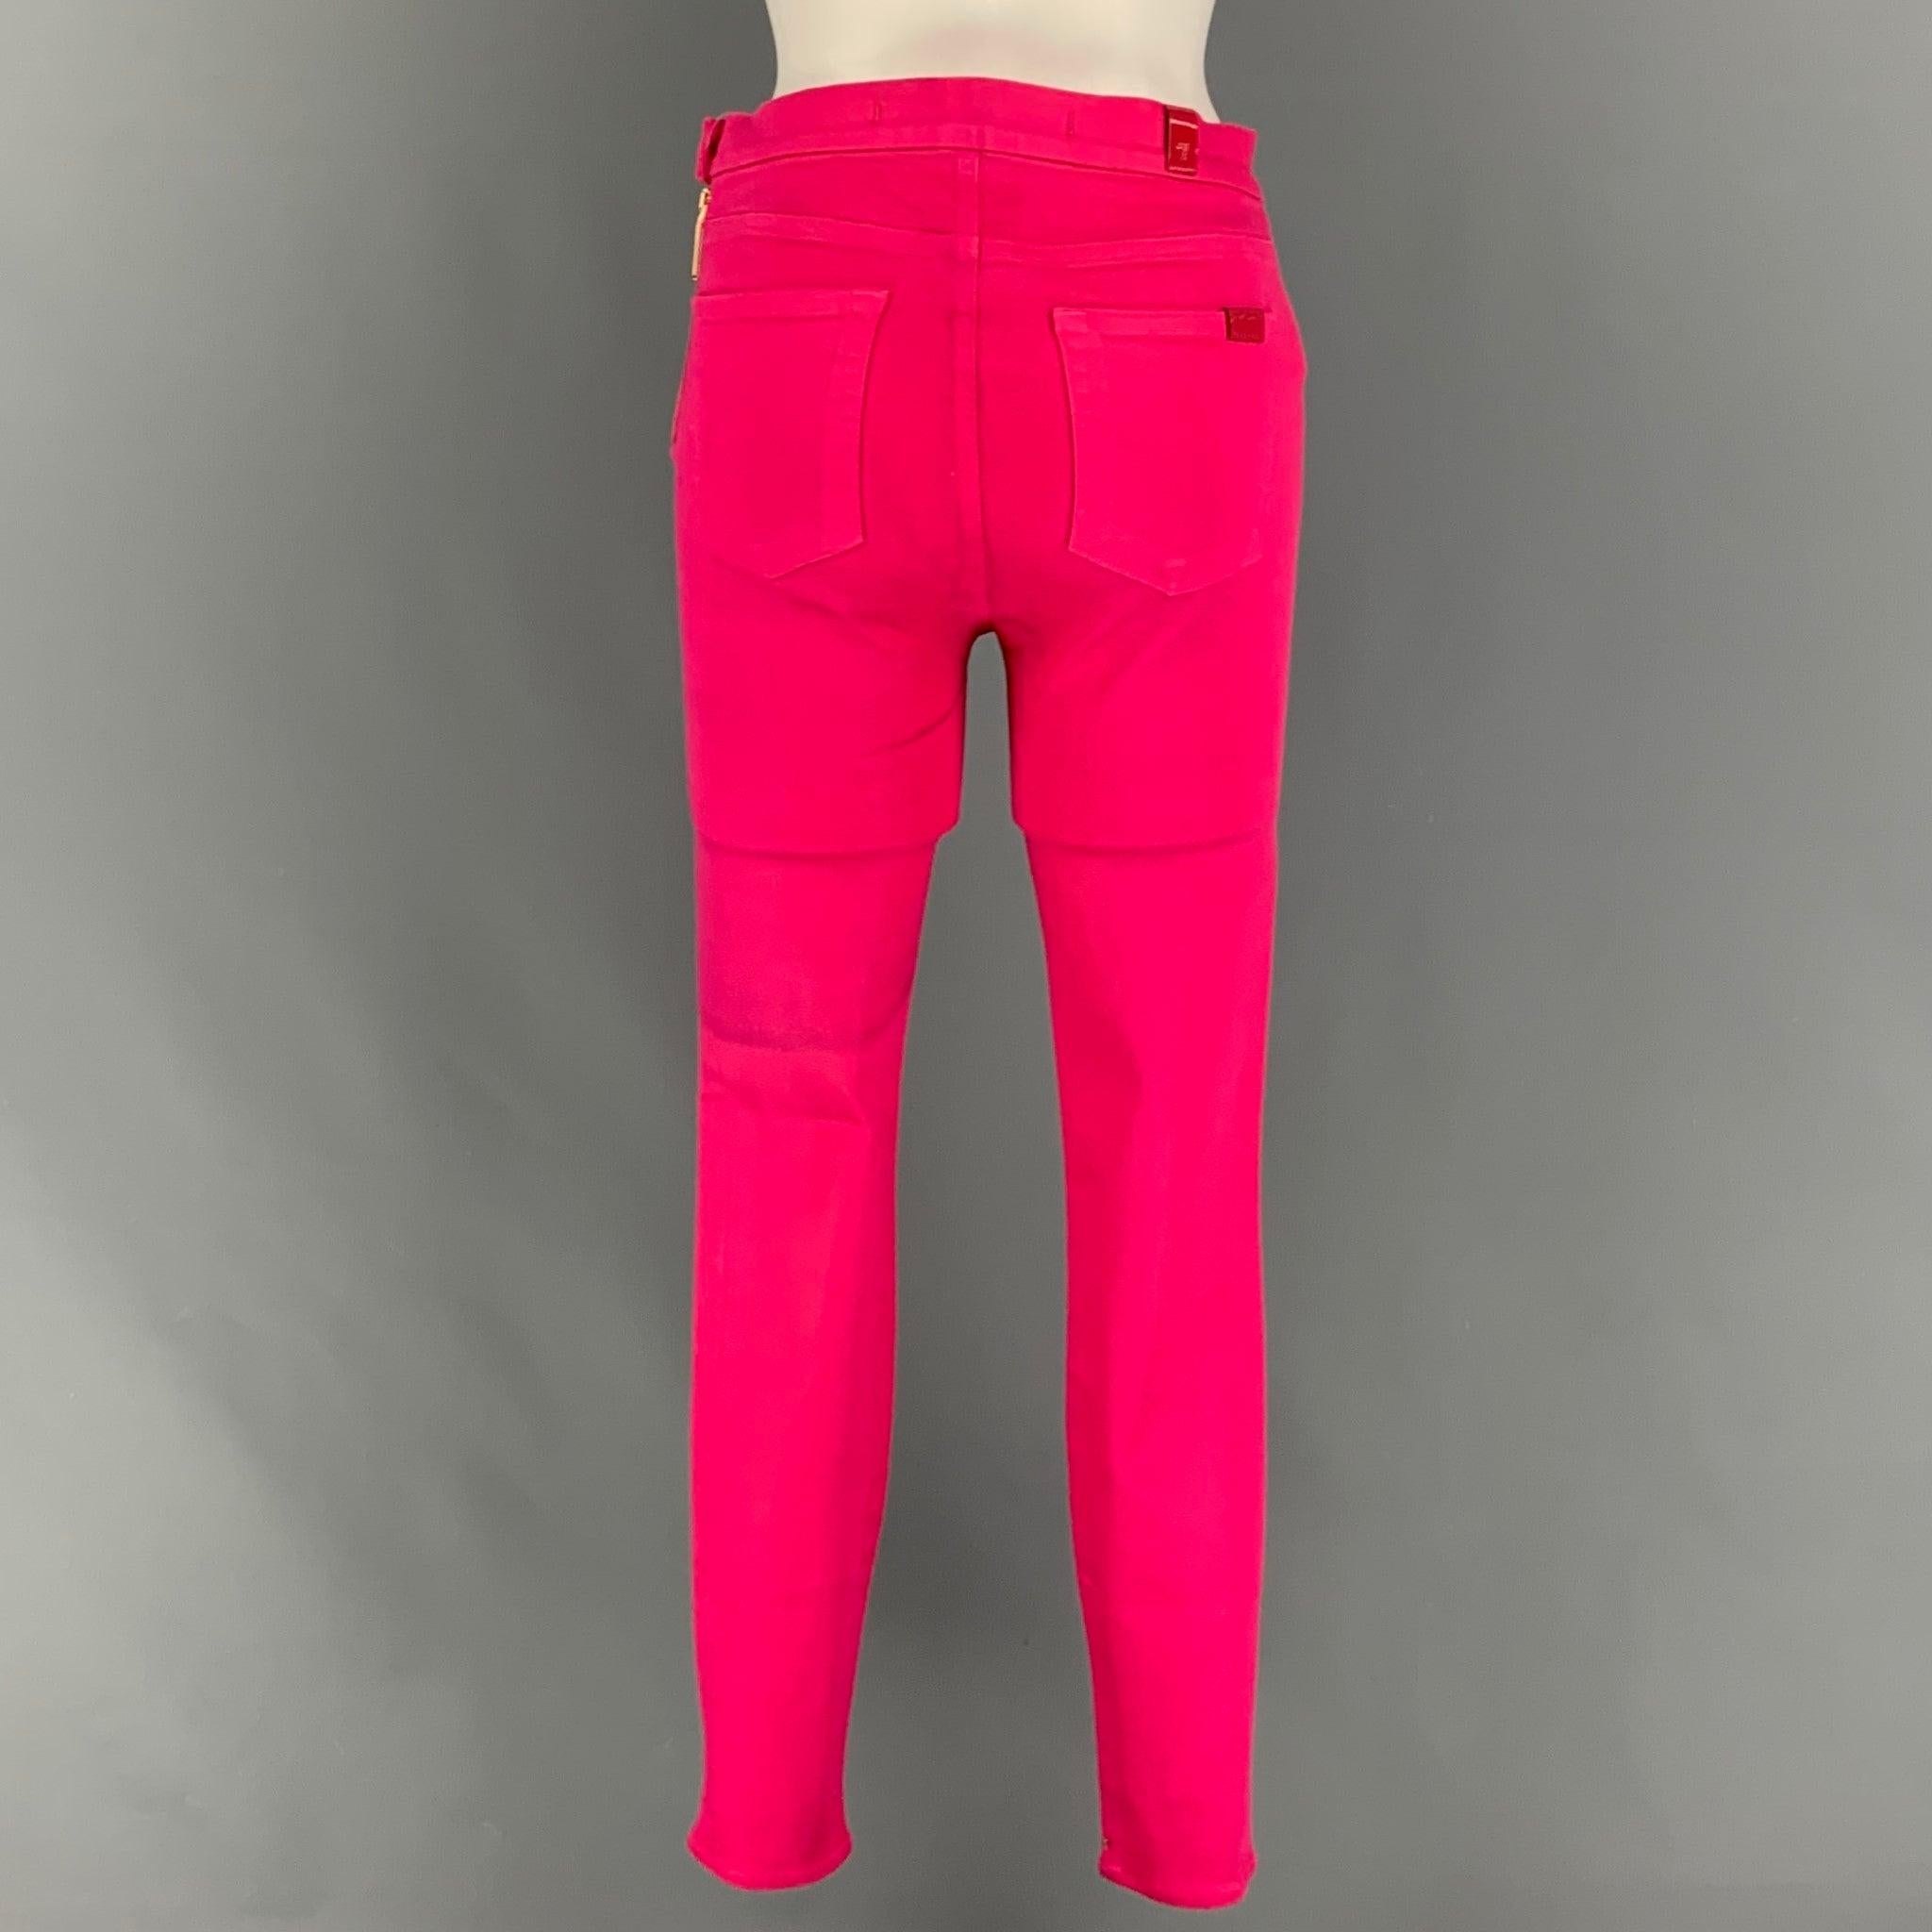 GIAMBATTISTA VALLI x 7 FOR ALL MANKIND pants comes in a pink cotton / elastane featuring a skinny fit, gold tone hardware, bak pockets, and a side button & zip up closure. Made in Italy.
Very Good
Pre-Owned Condition. 

Marked:   28 

Measurements: